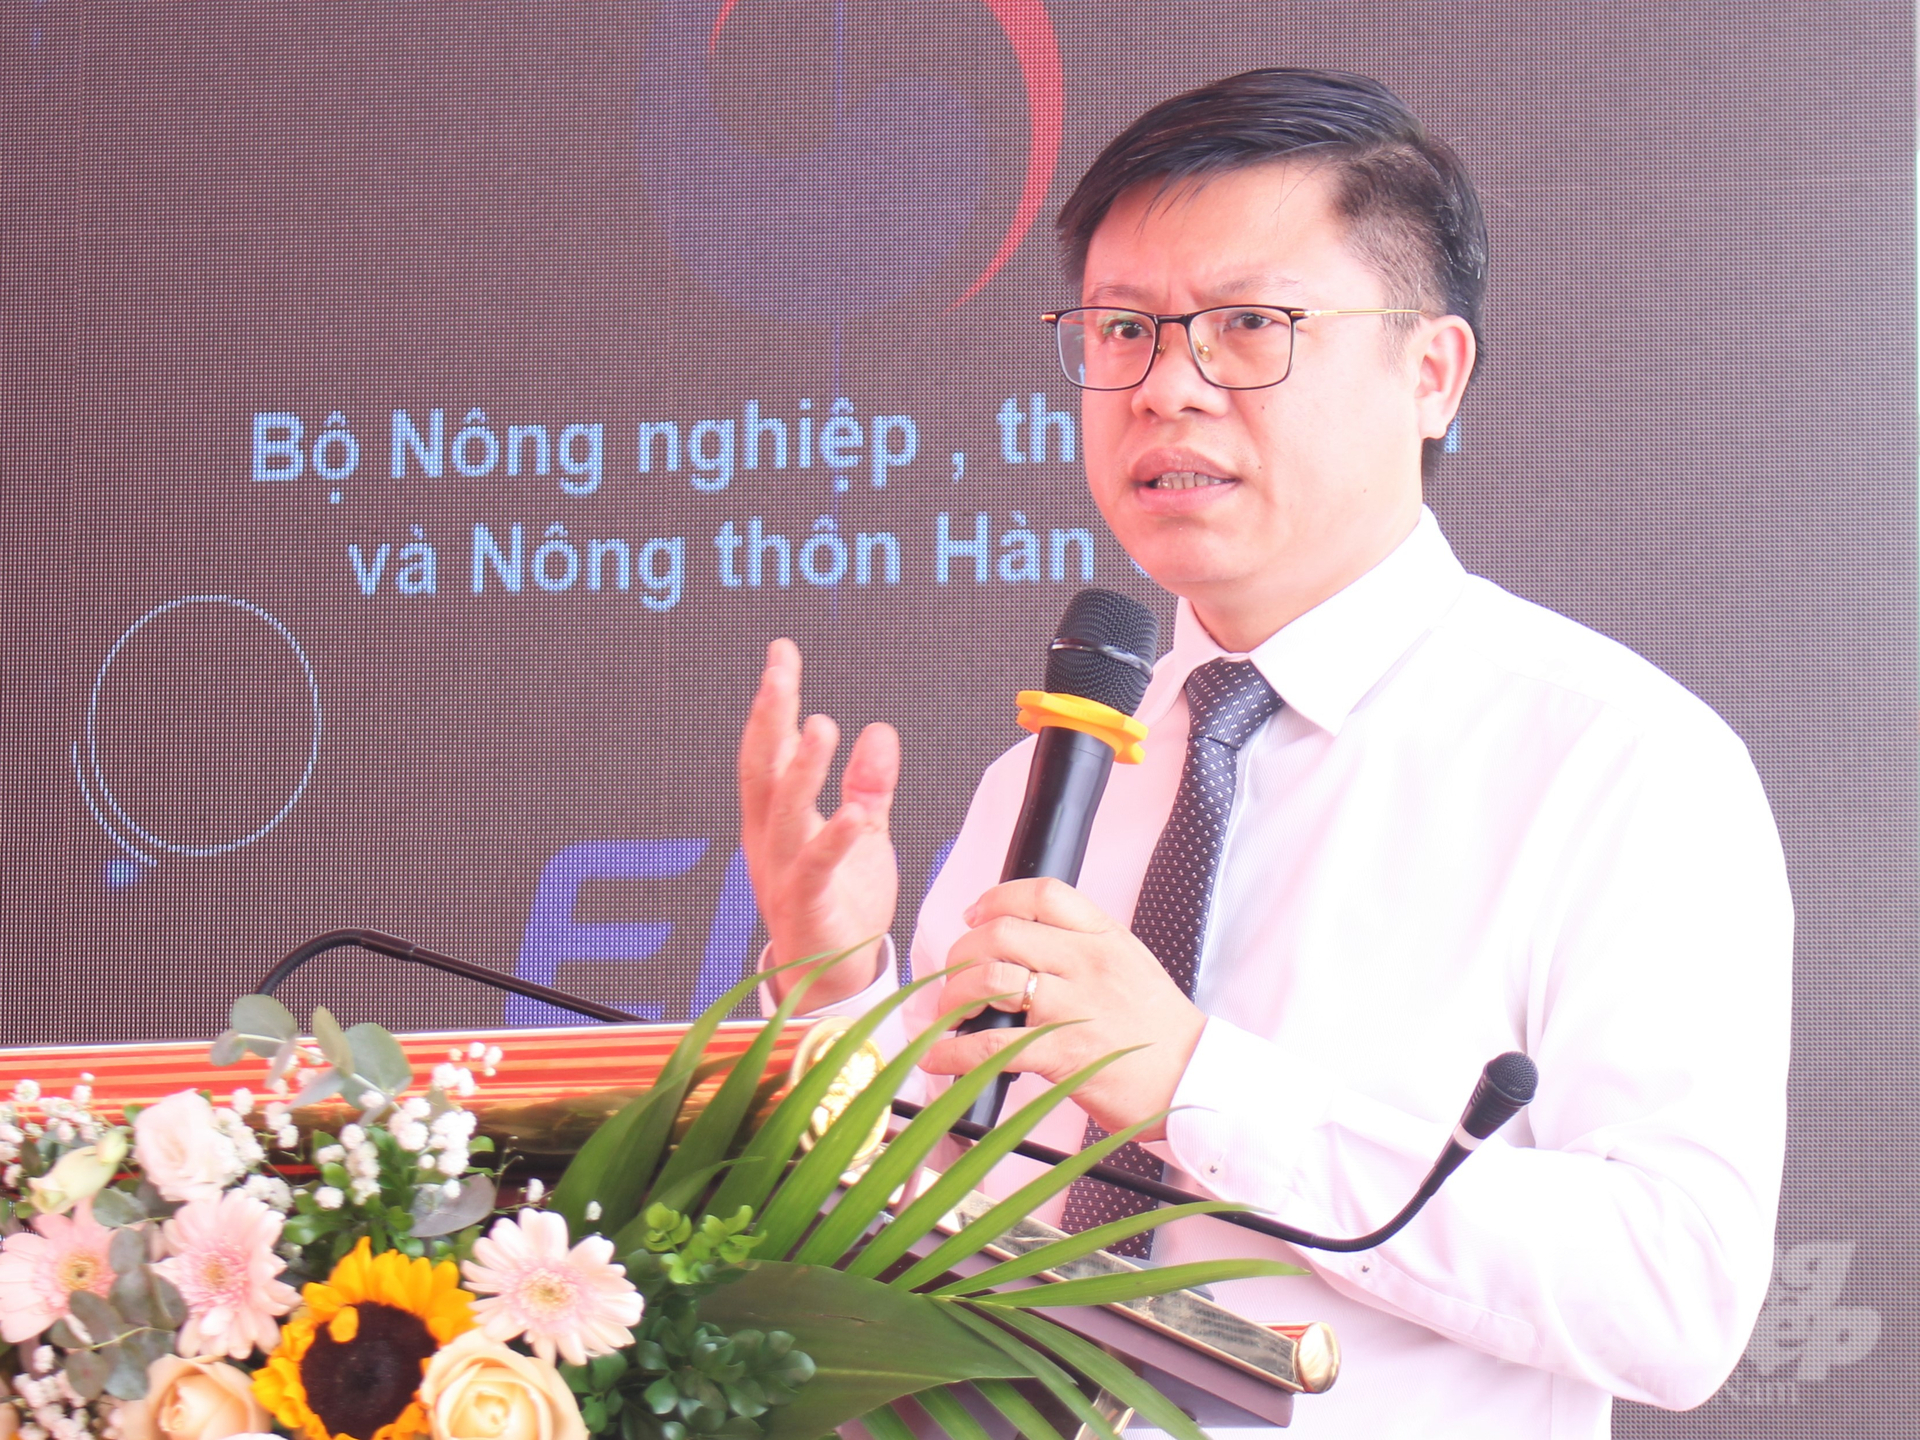 Mr. Nguyen Quoc Toan, Director of the Center for Digital Transformation and Agricultural Statistics, informed delegates about the project. Photo: Trung Quan.